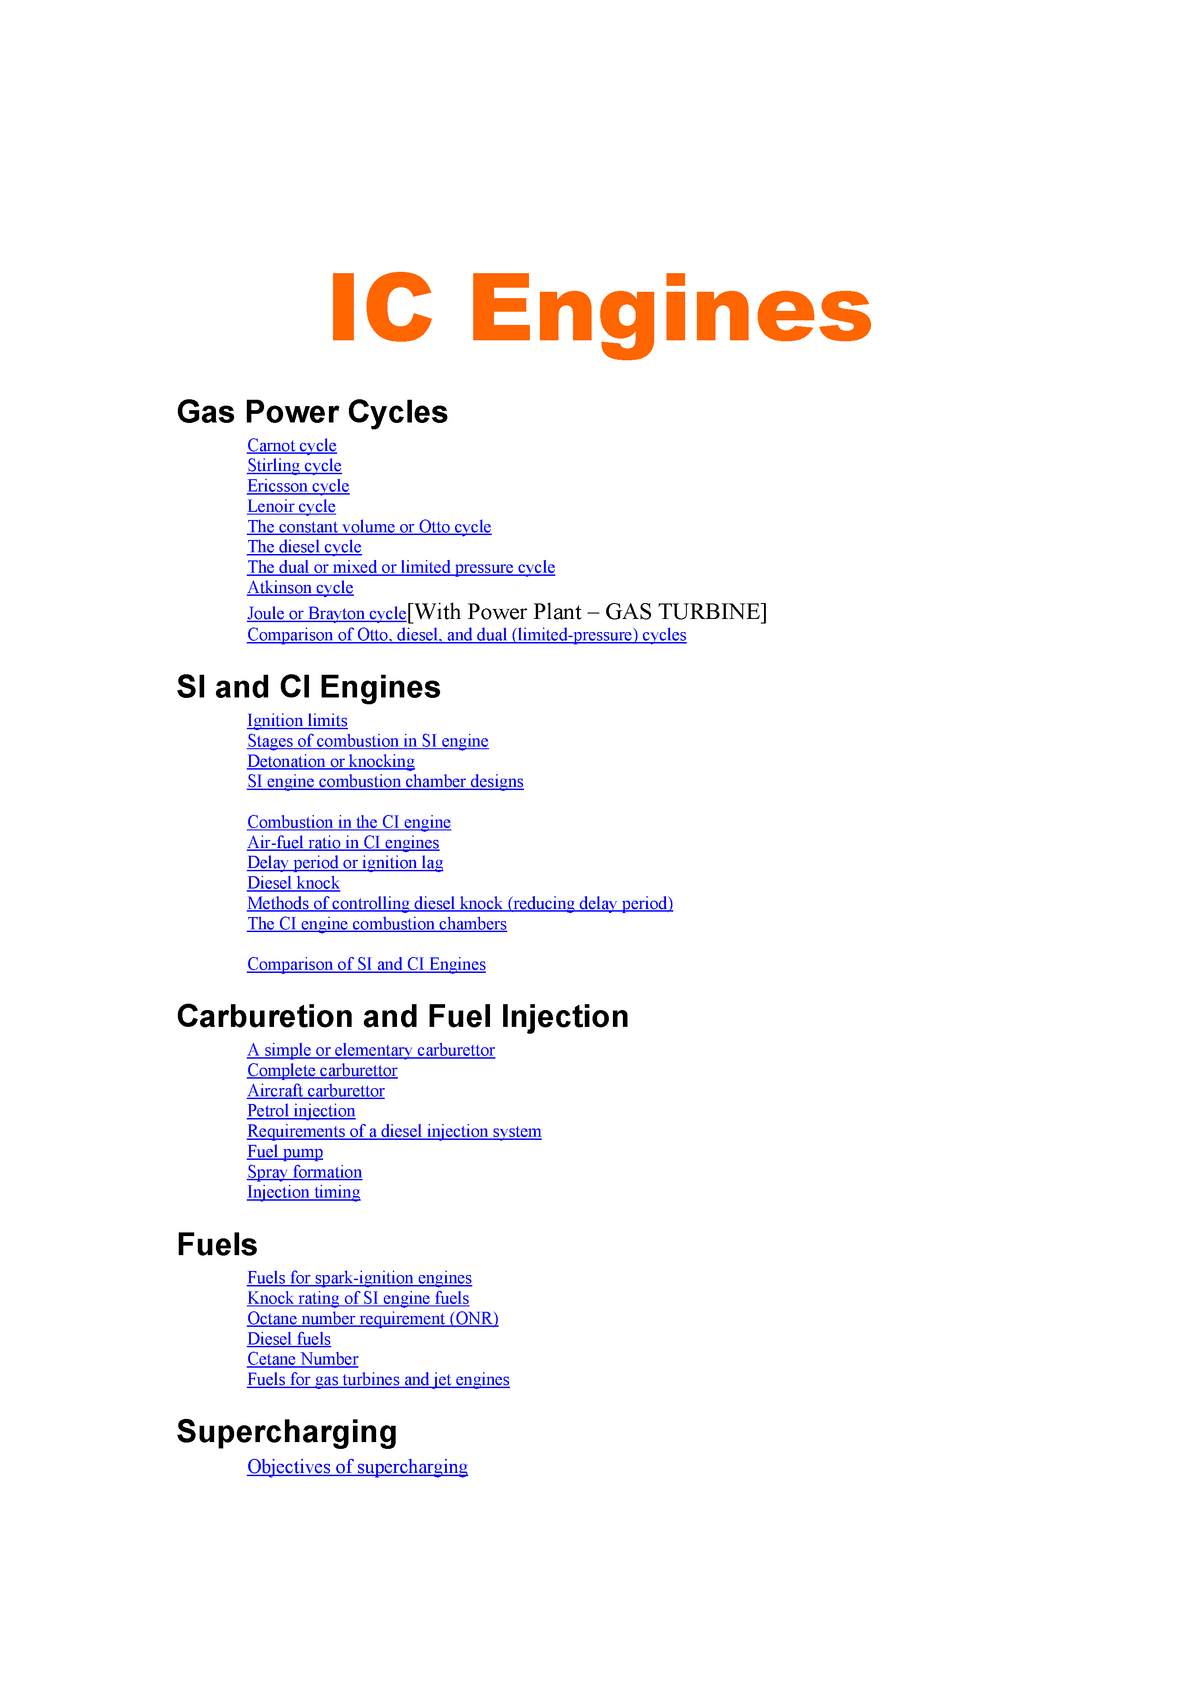 objective questions on ic engines